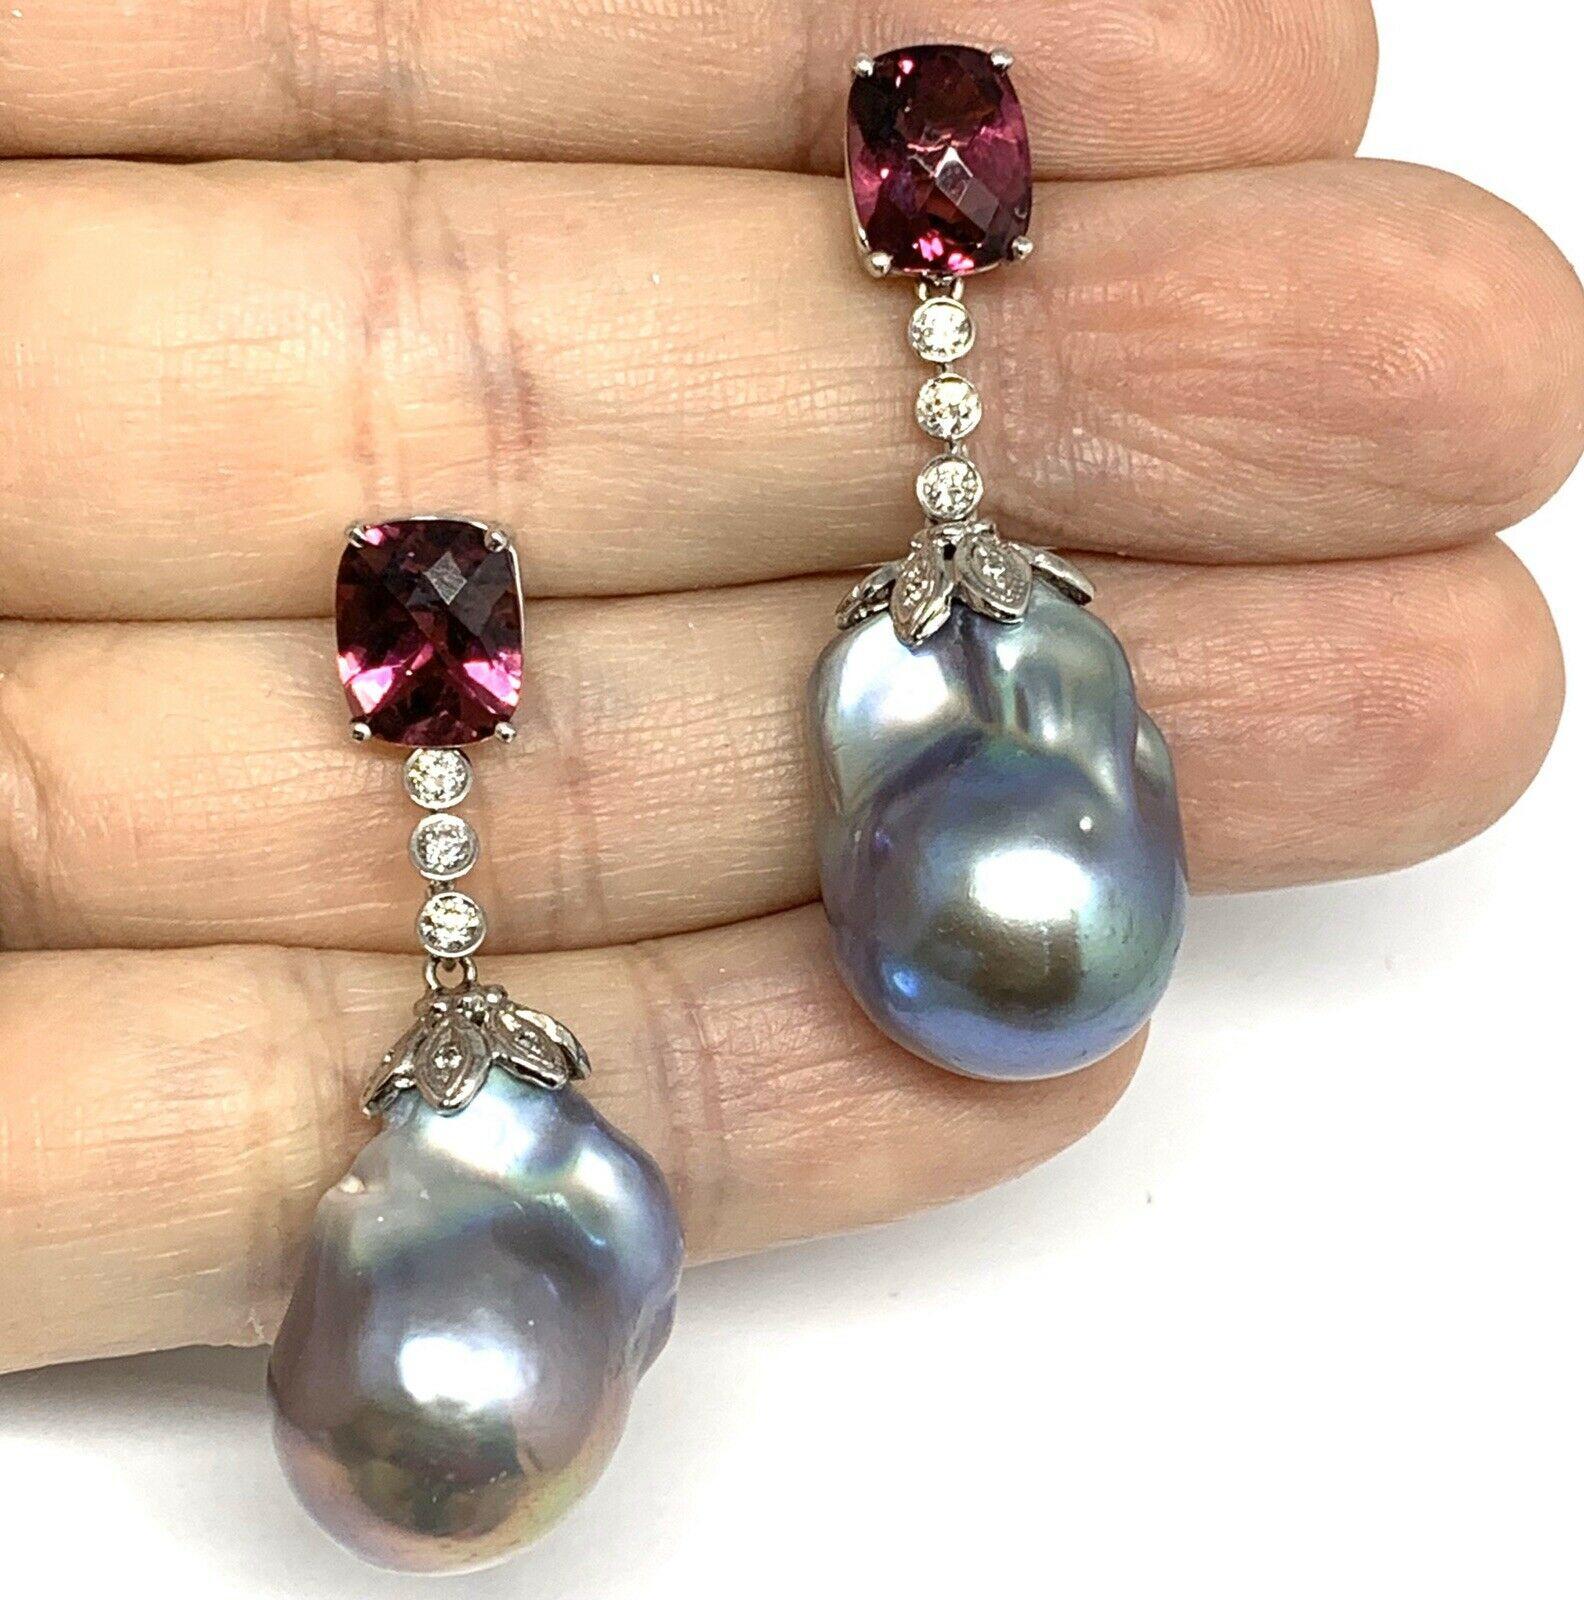 Fine Quality Freshwater Pearl Diamond Tourmaline Earrings 14k Gold Certified $4,950 920747

This is a Unique Custom Made Glamorous Piece of Jewelry!

Nothing says, “I Love you” more than Diamonds and Pearls!

These Freshwater pearl earrings have